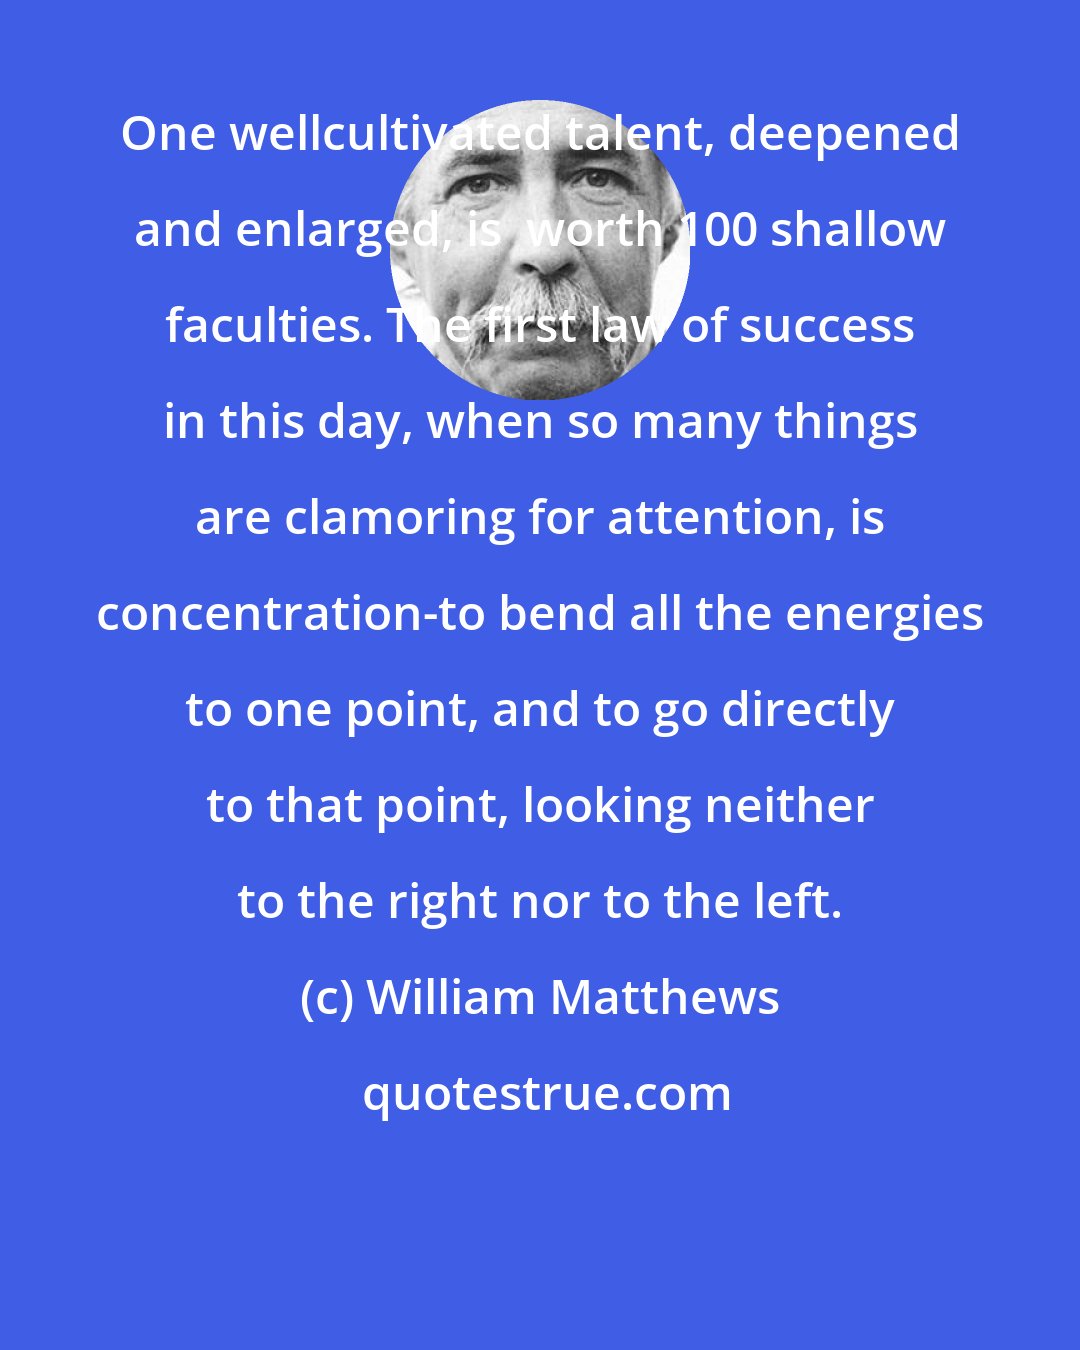 William Matthews: One wellcultivated talent, deepened and enlarged, is  worth 100 shallow faculties. The first law of success in this day, when so many things are clamoring for attention, is concentration-to bend all the energies to one point, and to go directly to that point, looking neither to the right nor to the left.